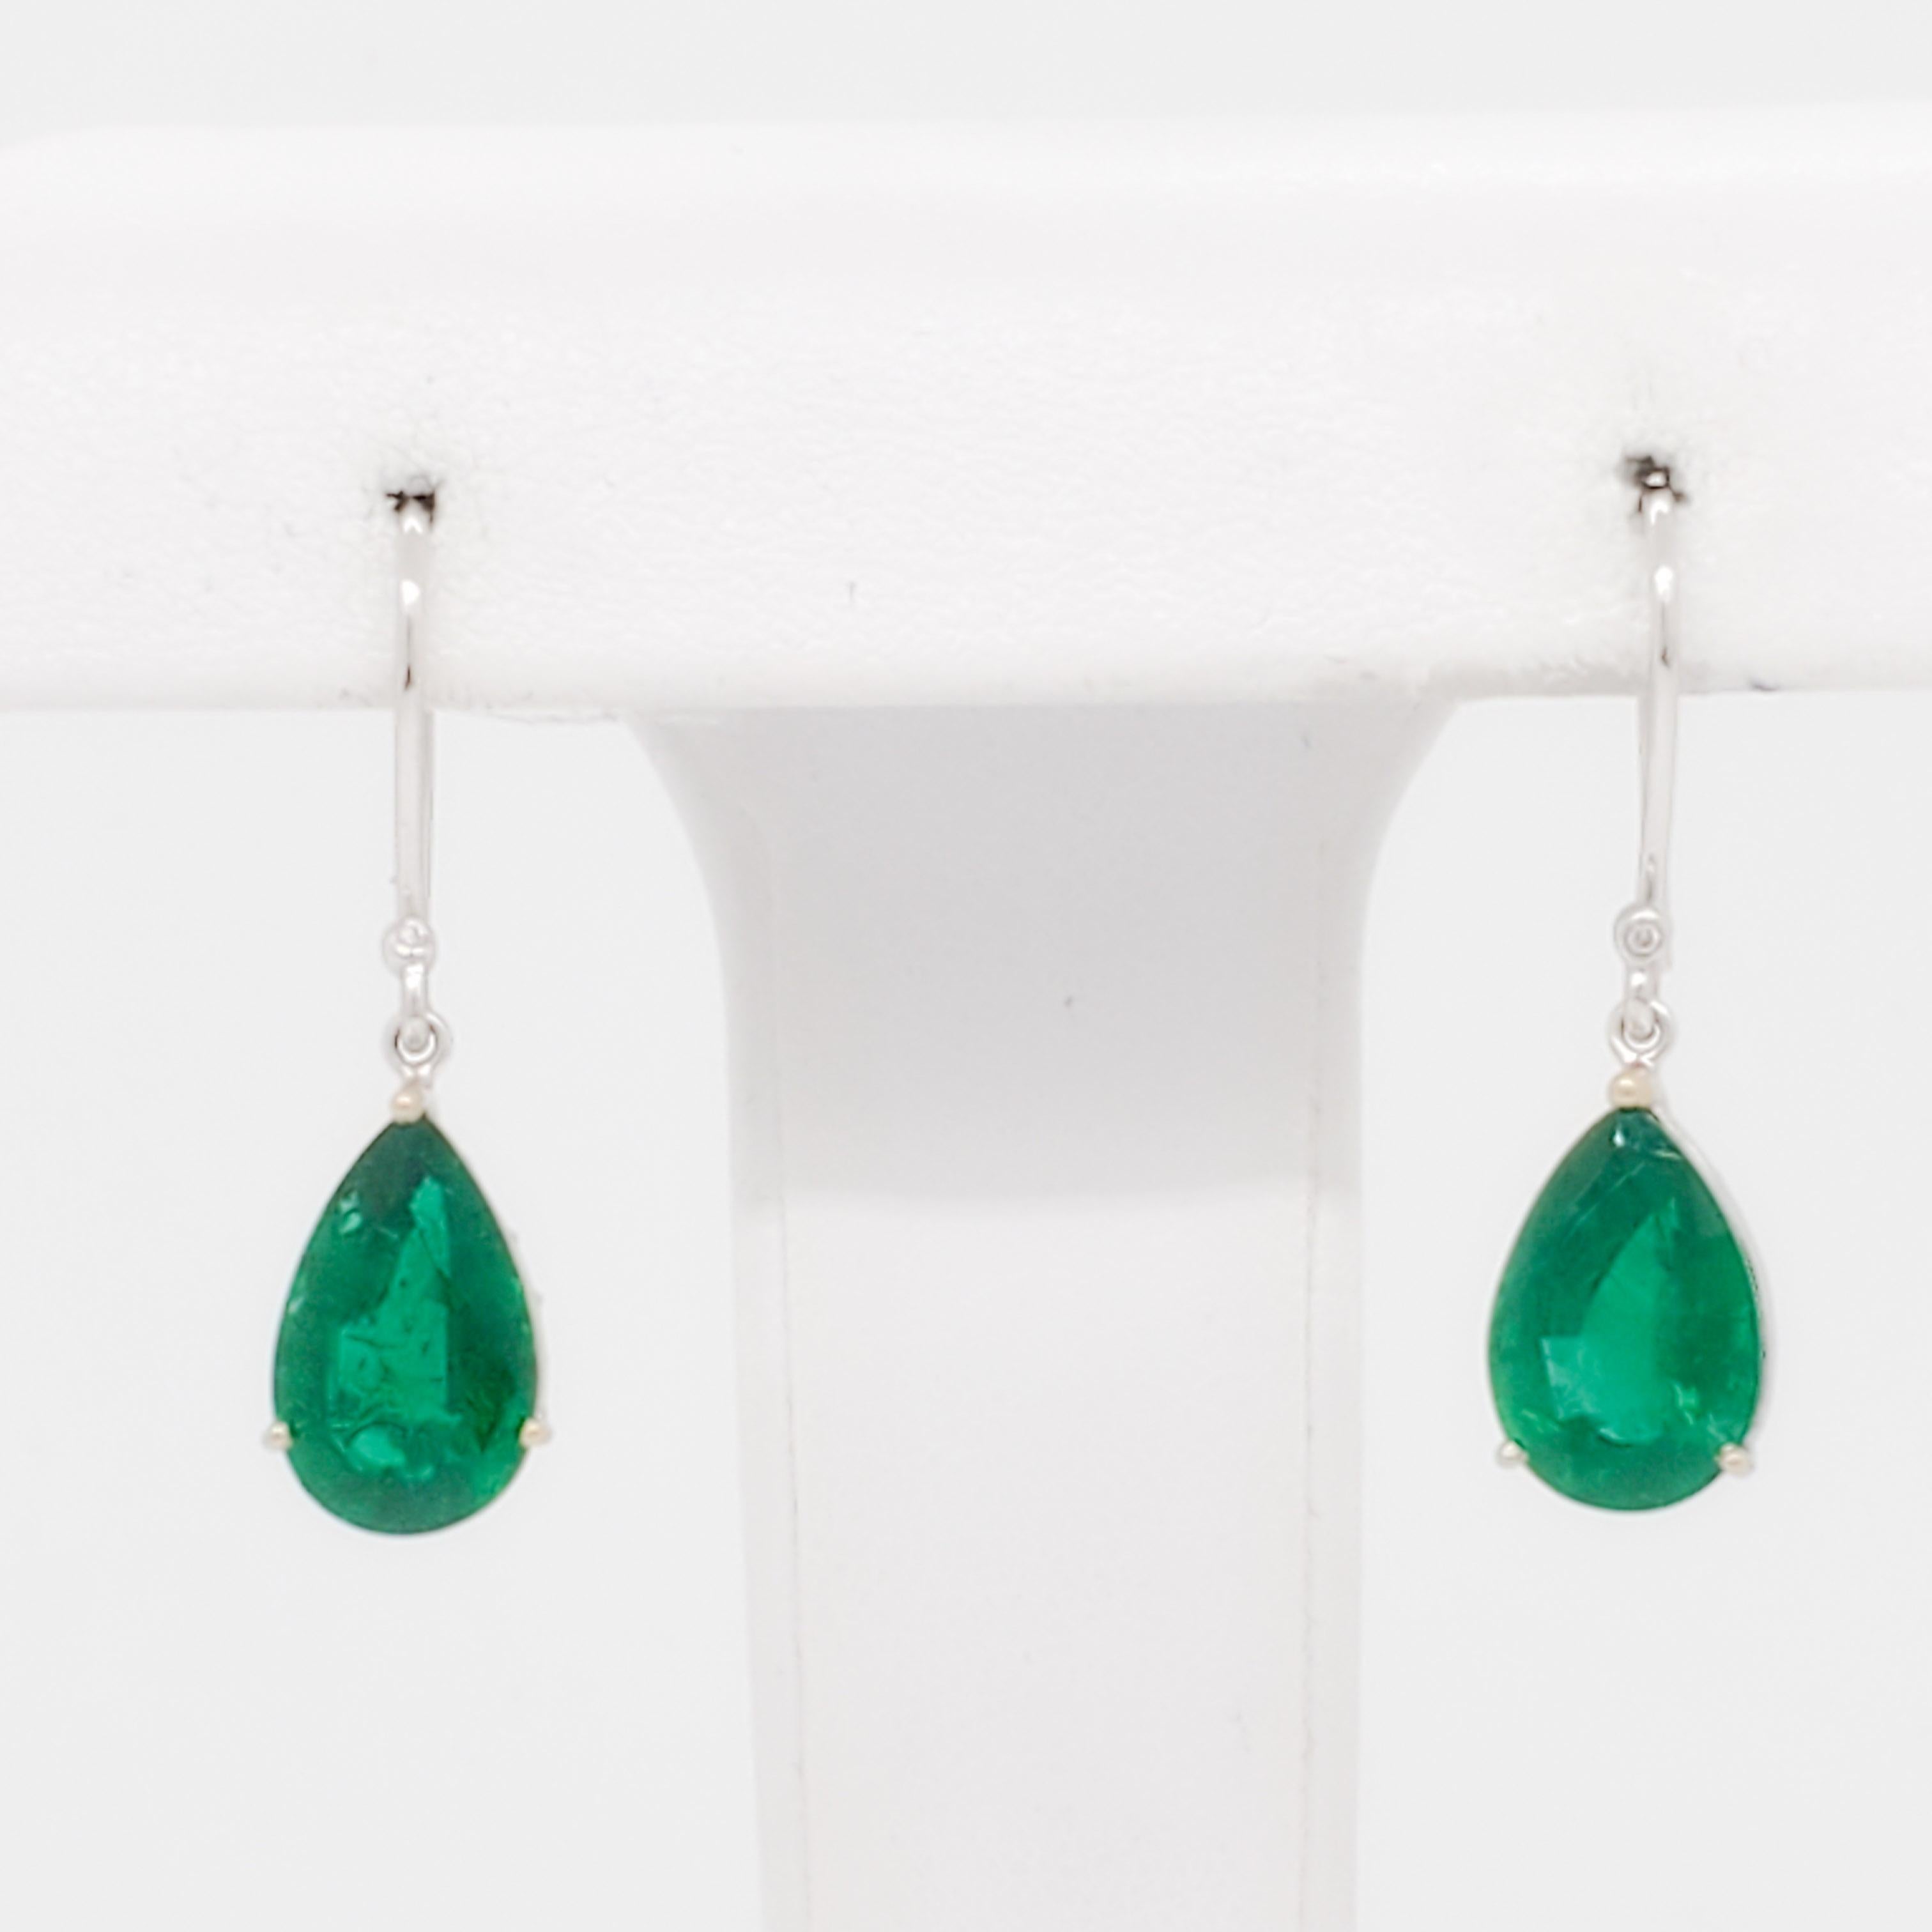 Gorgeous 6.51 ct. emerald pear shapes with 0.01 ct. diamond rounds.  Handmade in 18k yellow and white gold.  